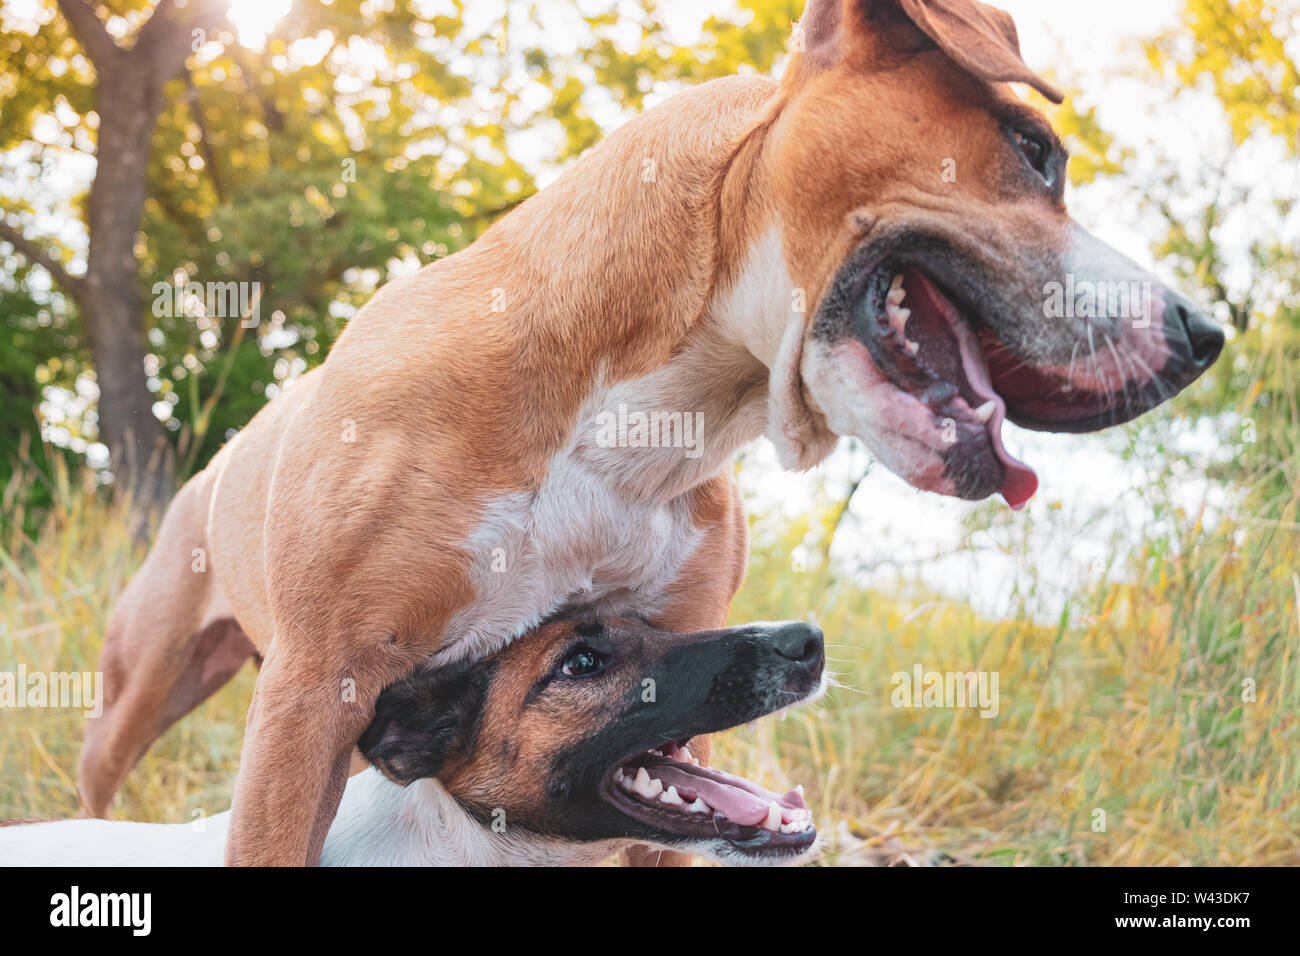 Happy playful dogs in the nature. Grown up dog stands protectively next to her puppy companion - parenting or training concept Stock Photo